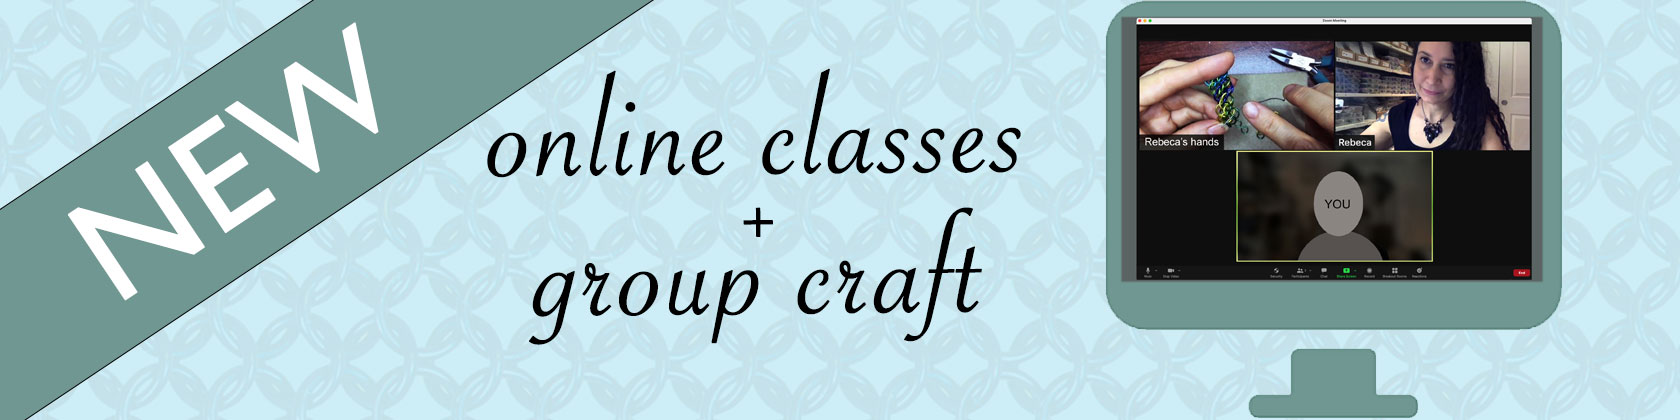 online-classes_group-craft